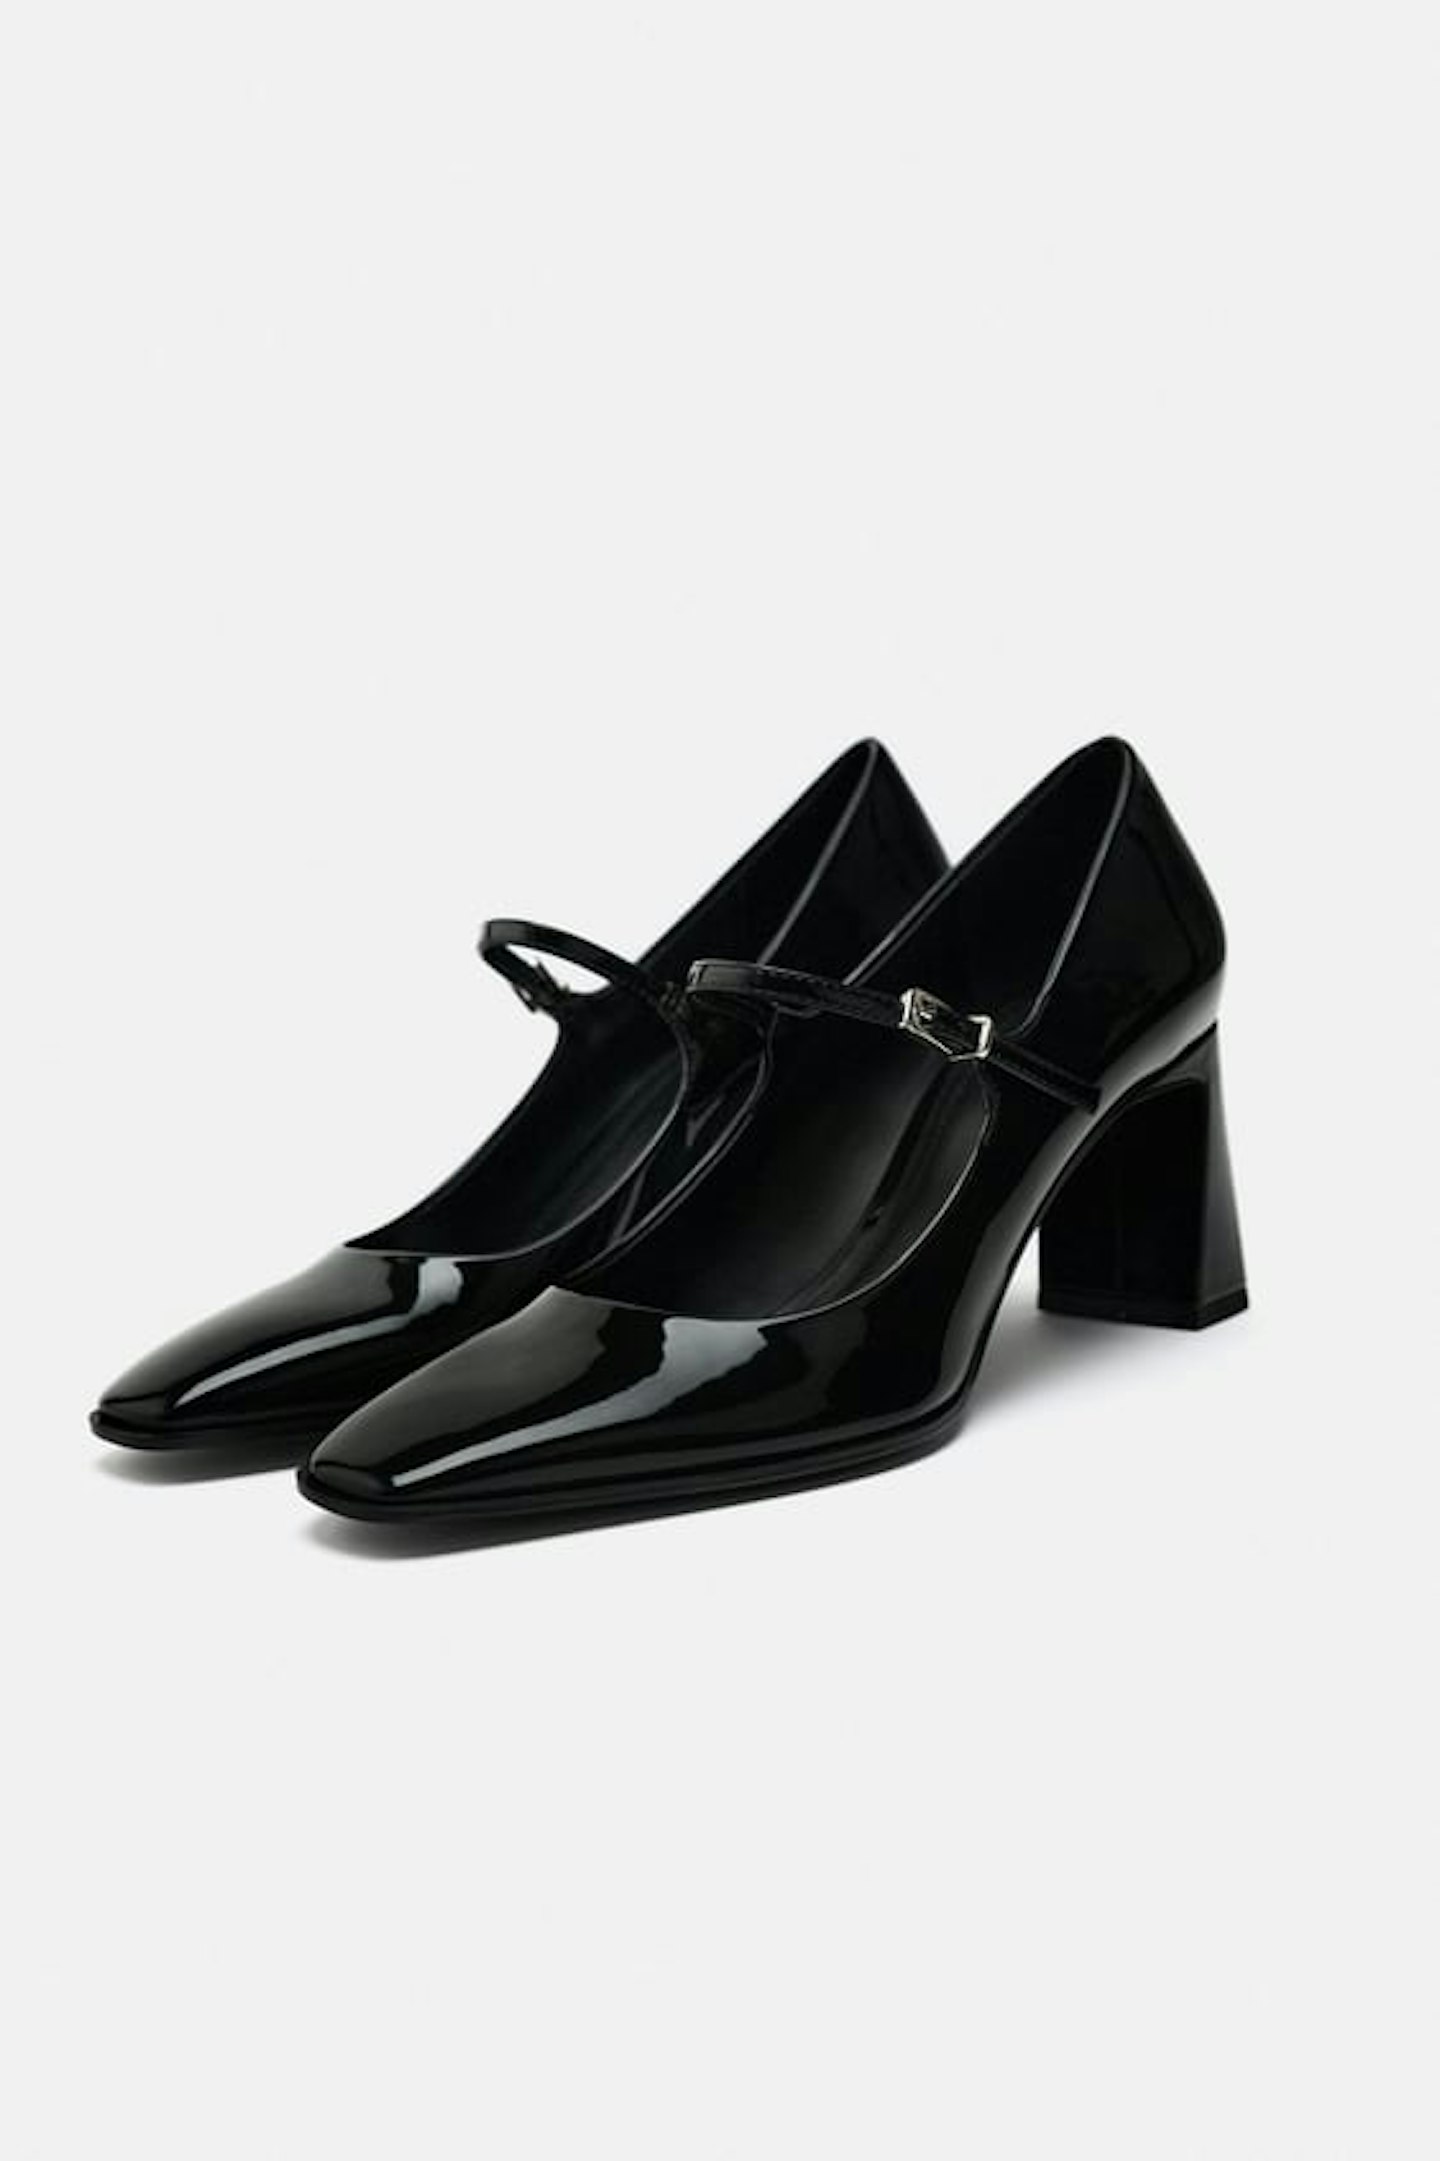 Zara, Block Heel Shoes With Ankle Strap